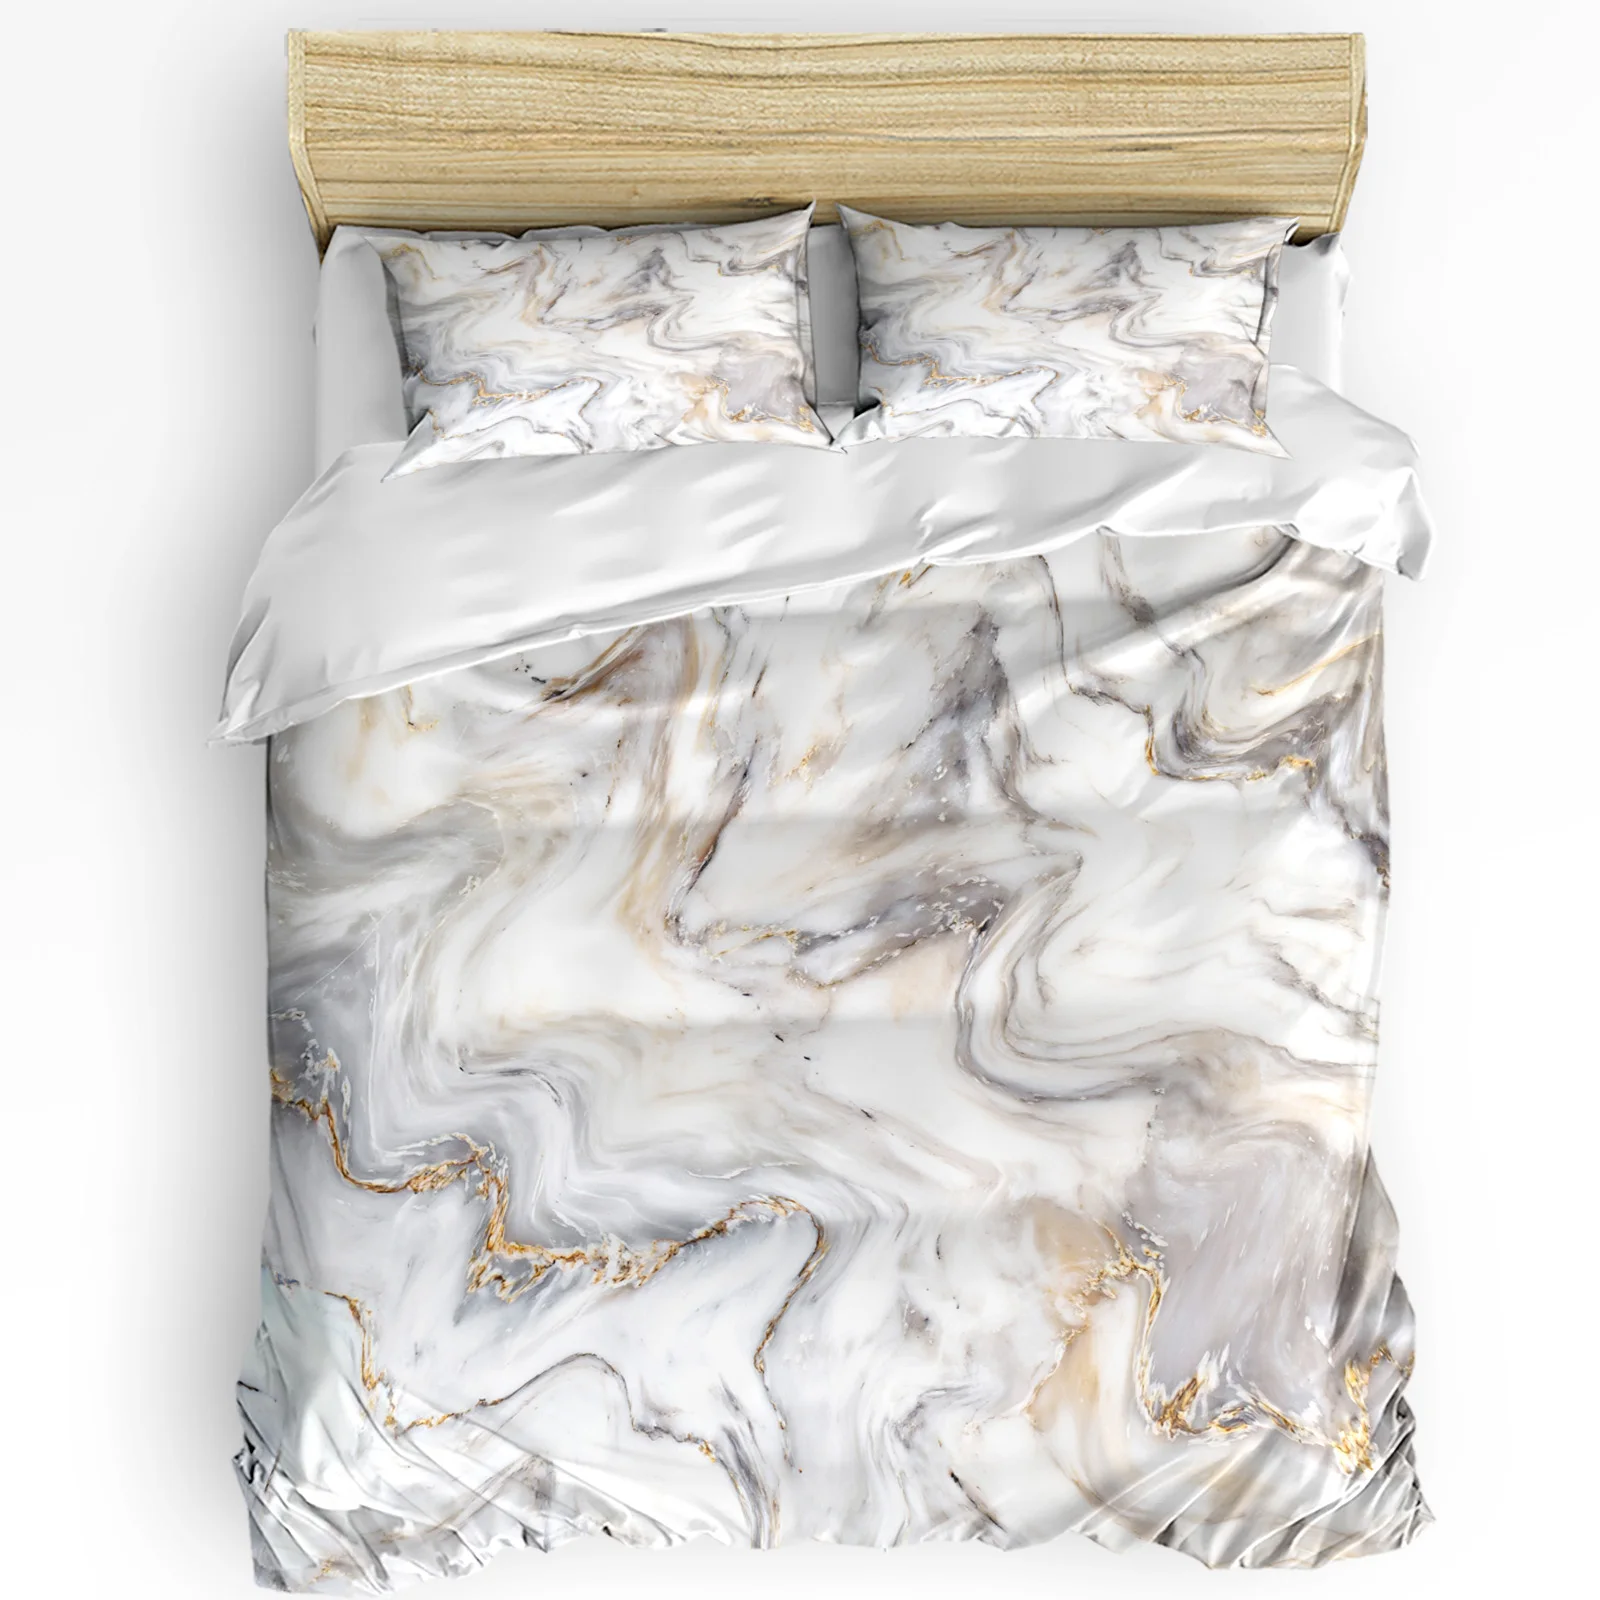 abstract-marble-texture-printed-comfort-duvet-cover-pillow-case-home-textile-quilt-cover-boy-kid-teen-girl-3pcs-bedding-set